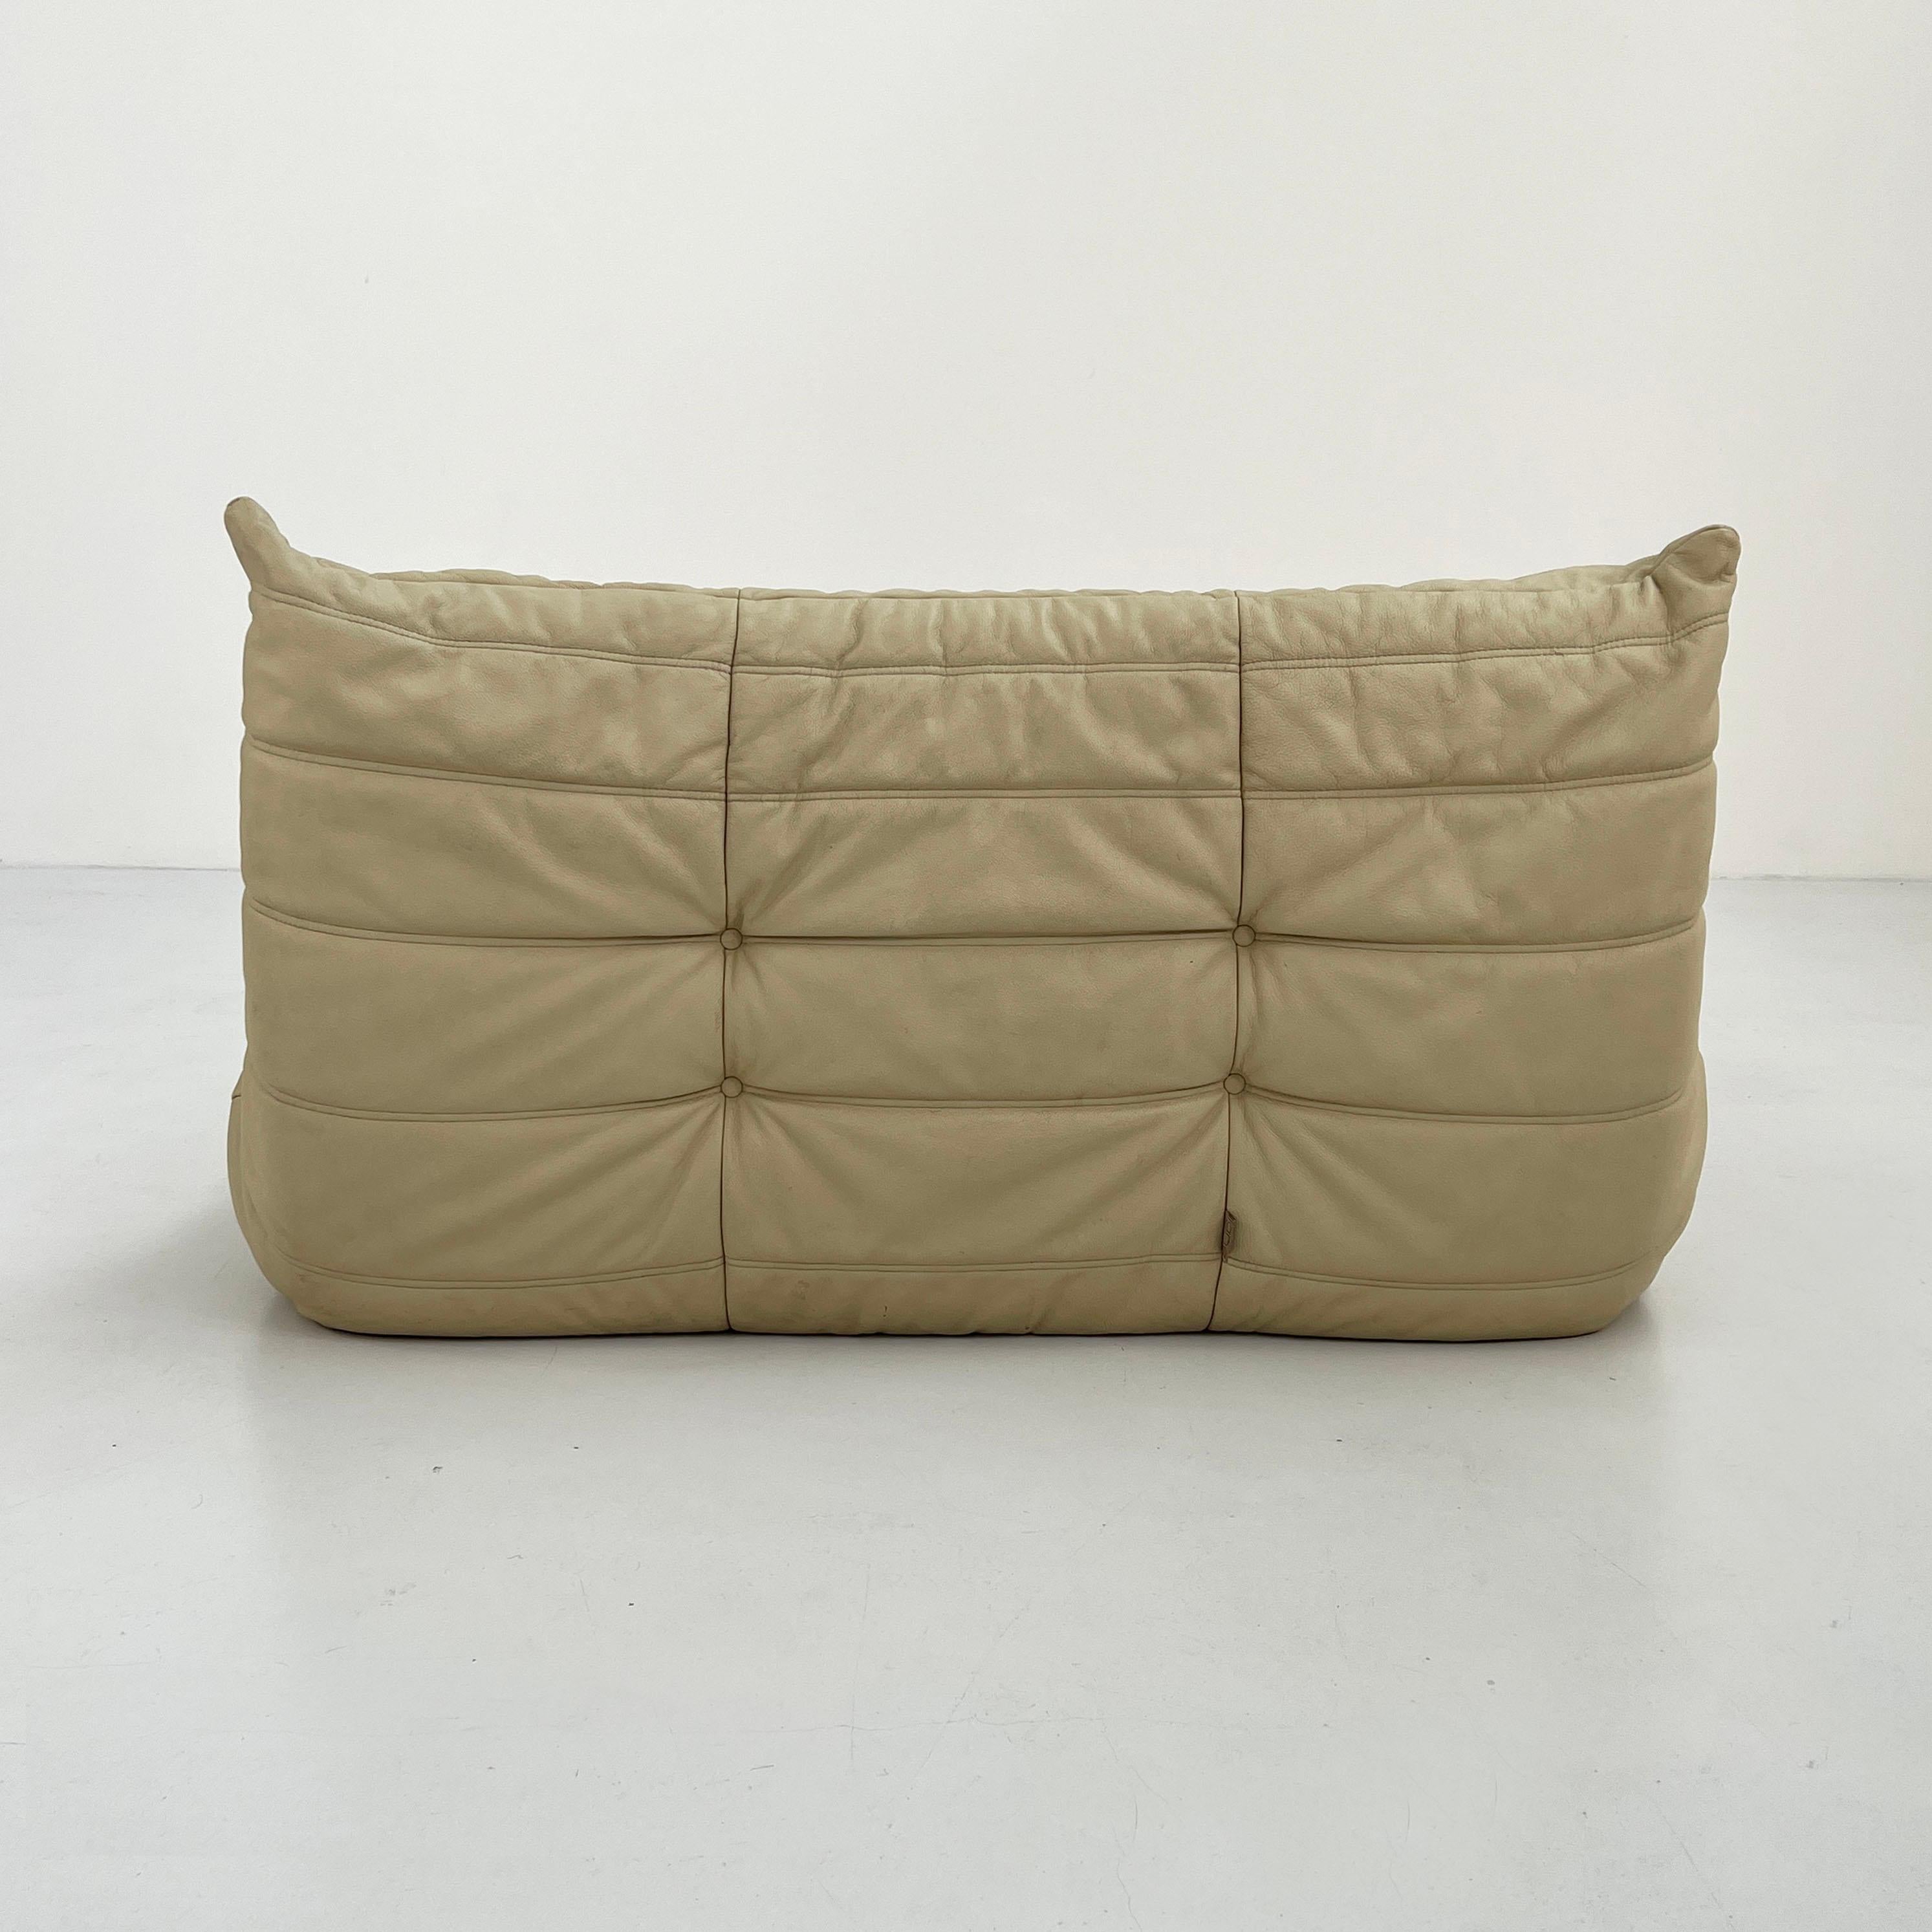 Late 20th Century 2-Seater Togo Sofa in Cream Leather by Michel Ducaroy for Ligne Roset, 1970s